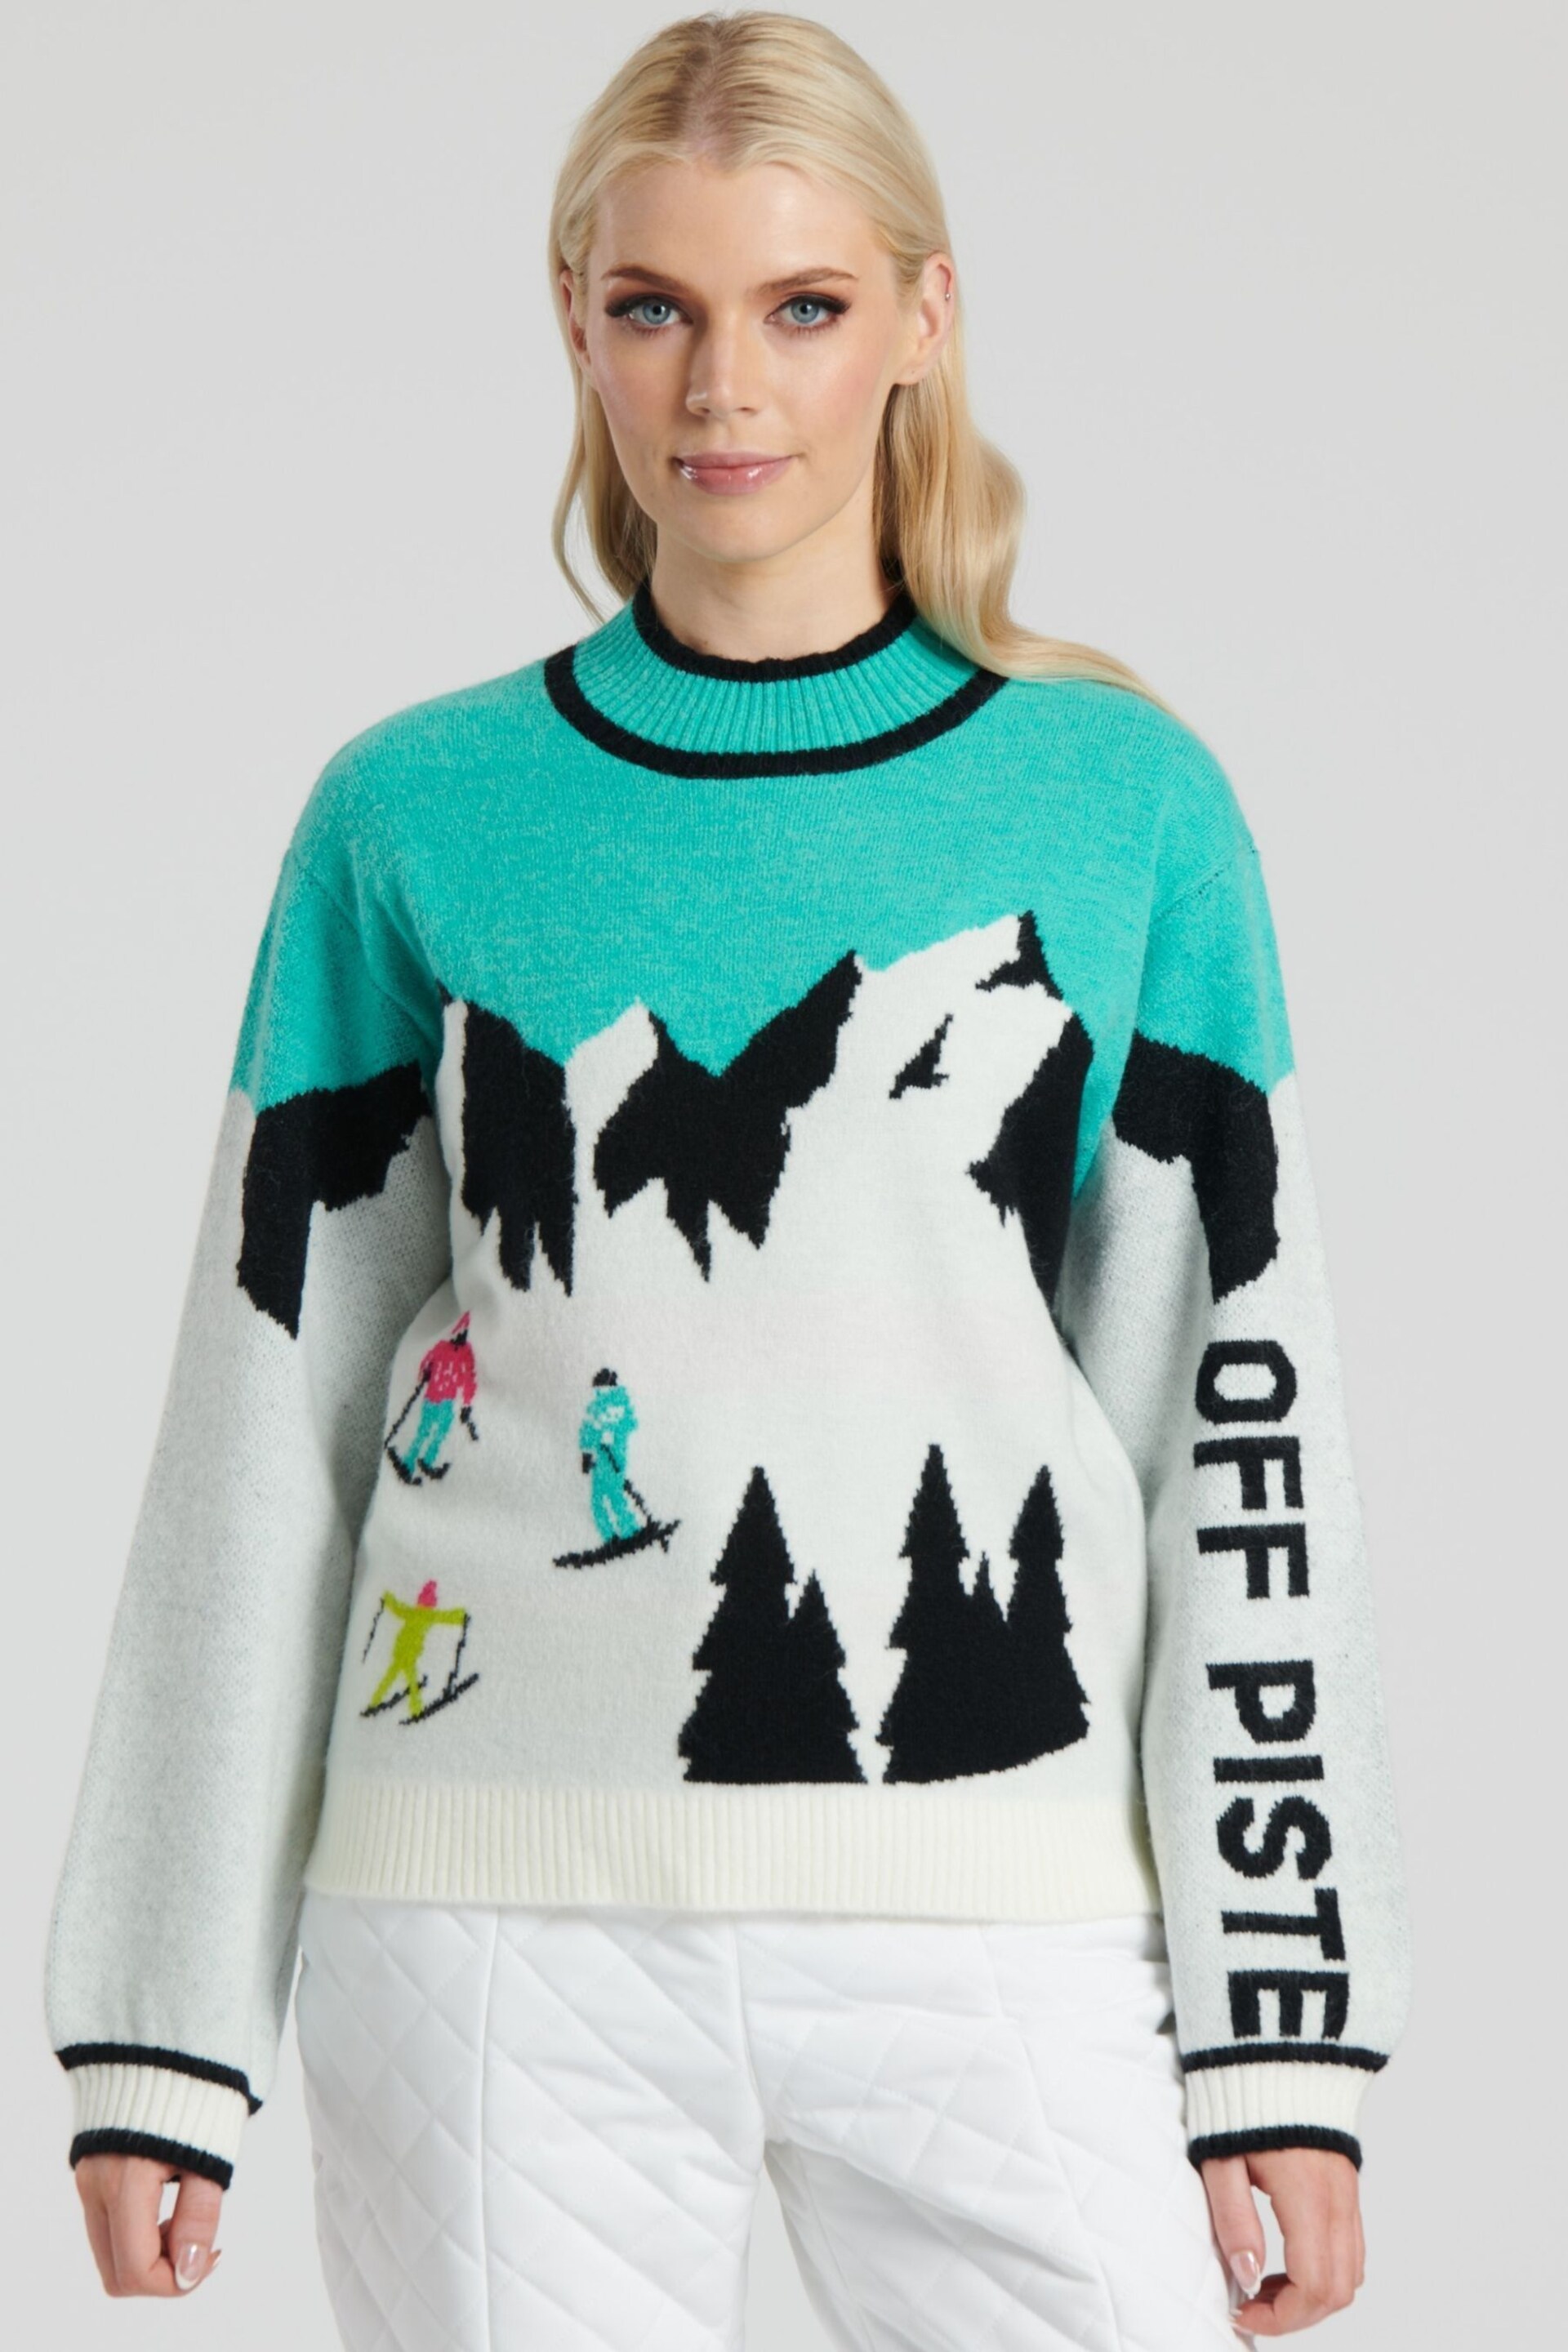 South Beach Blue Funnel Neck Knit Jumper - Image 1 of 5